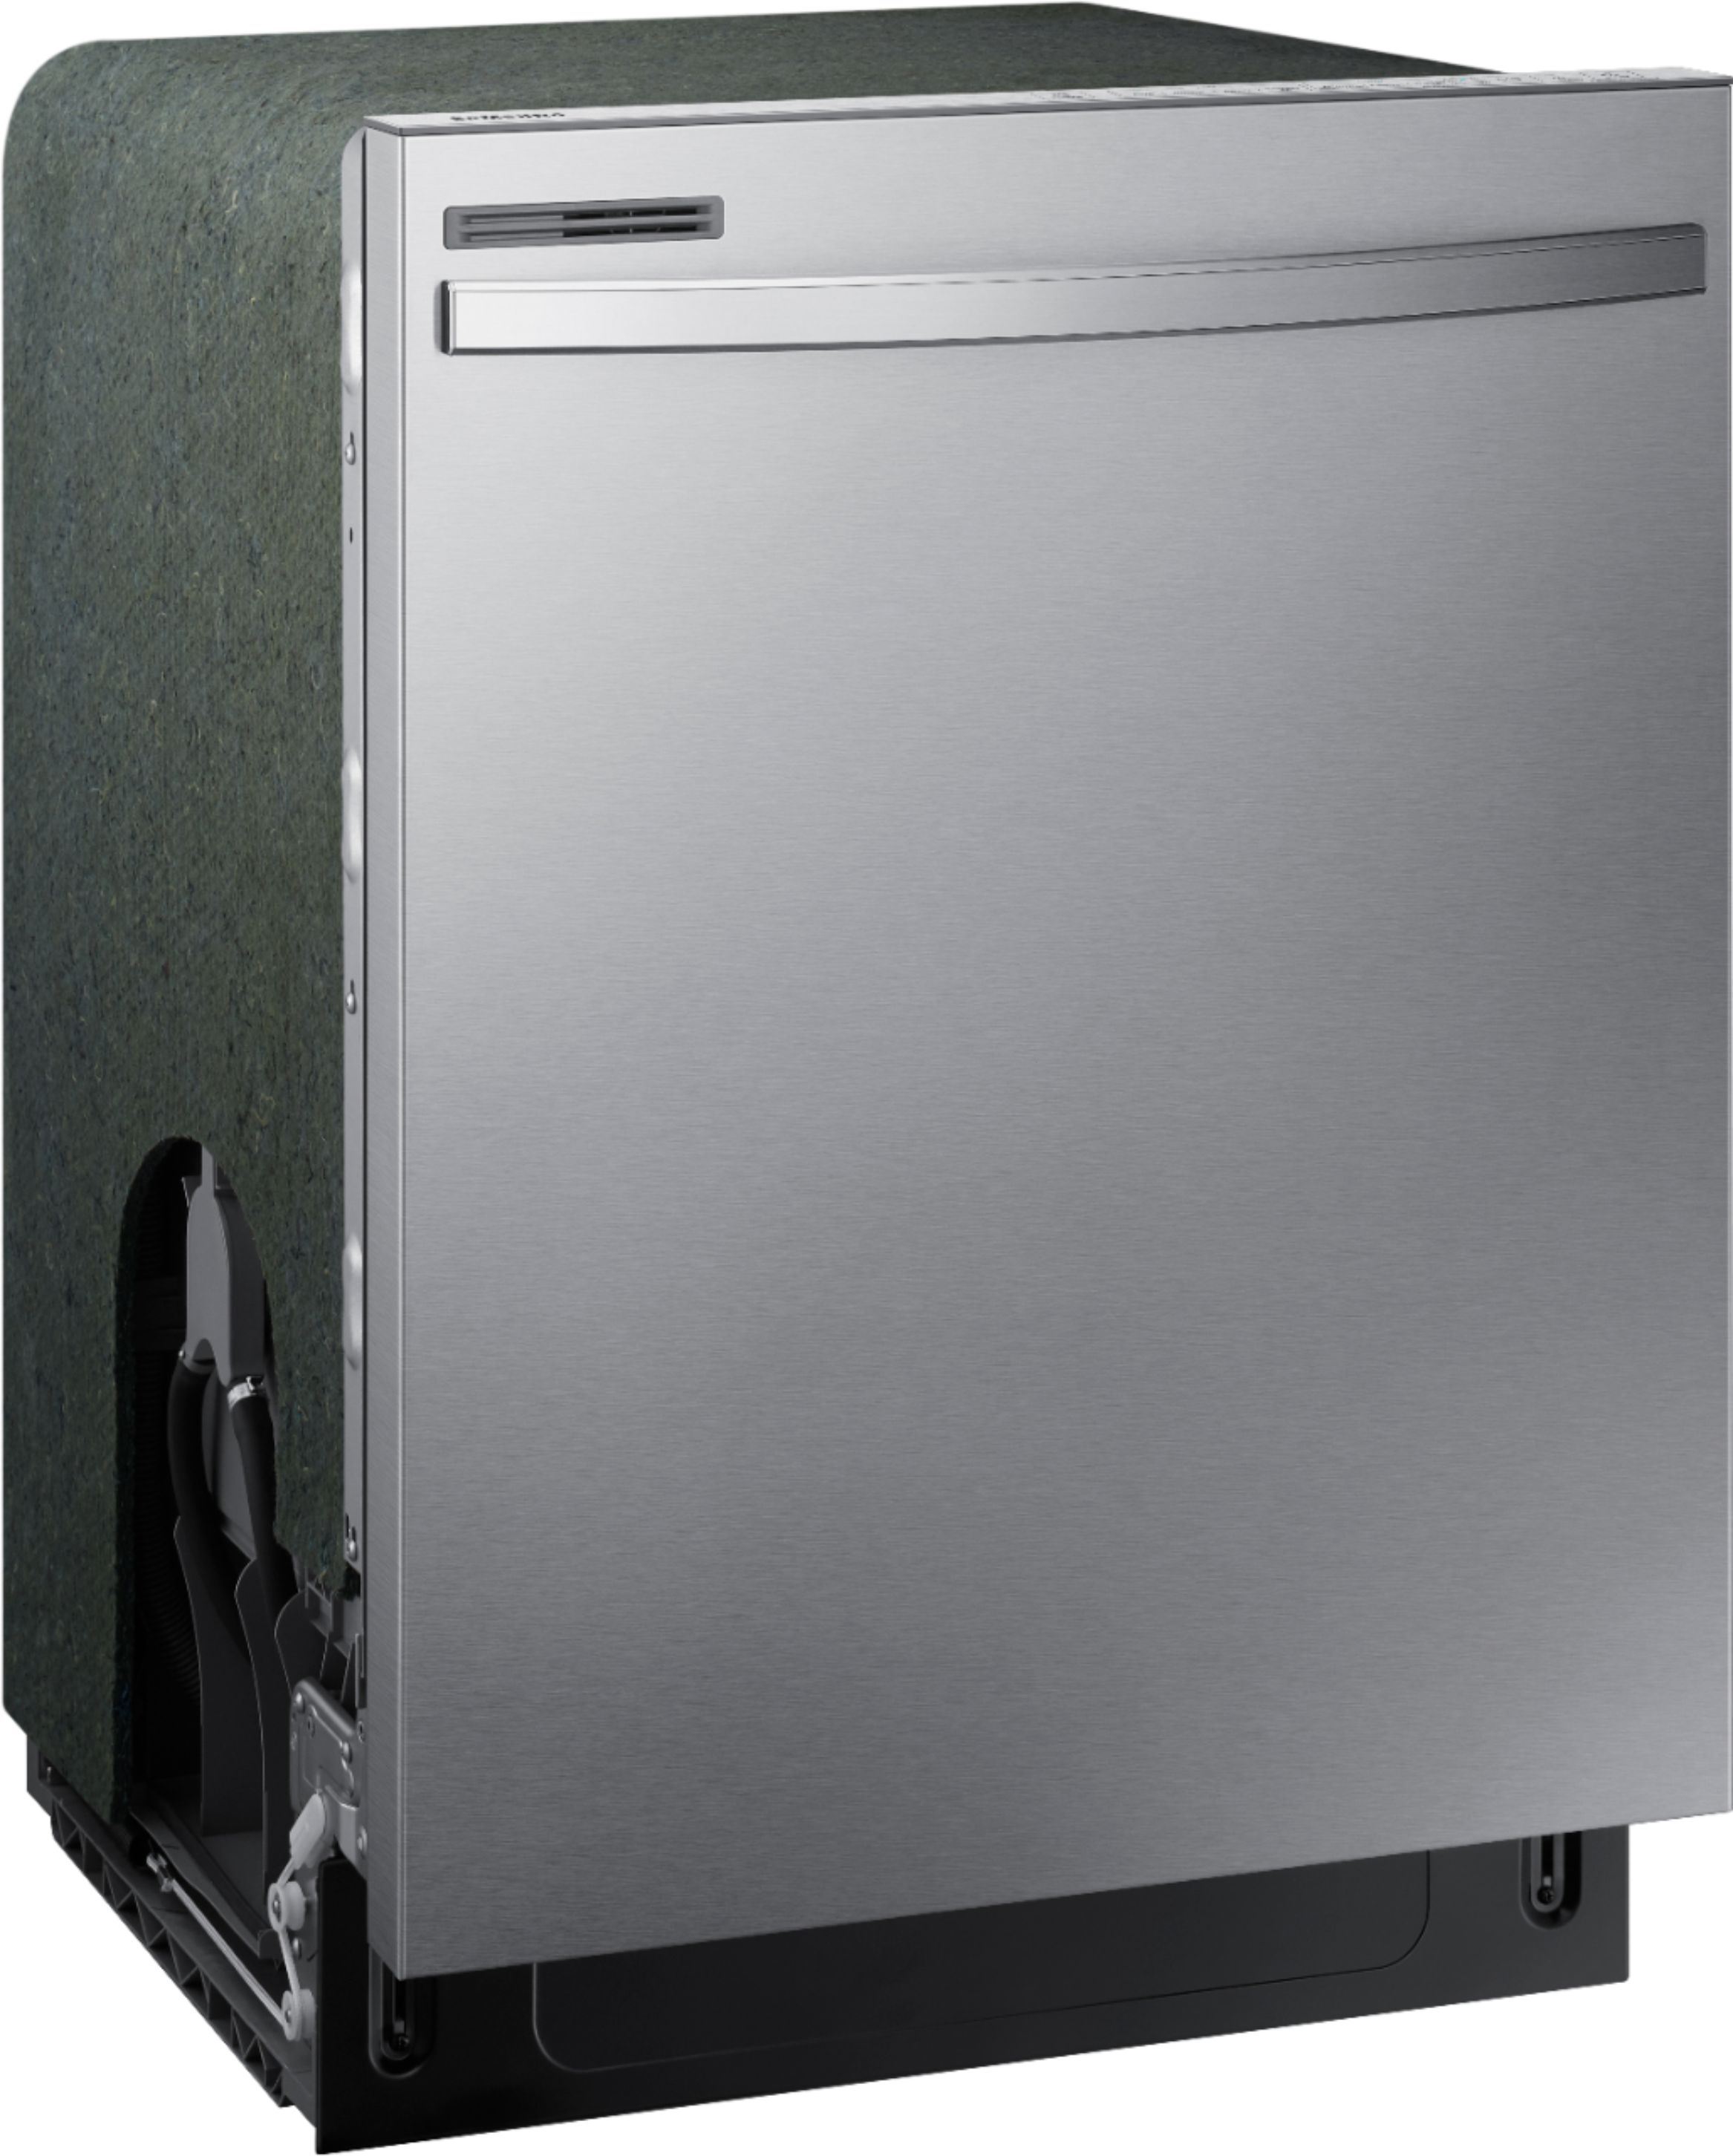 Angle View: Samsung - 24" Top Control Built-In Dishwasher - Black stainless steel